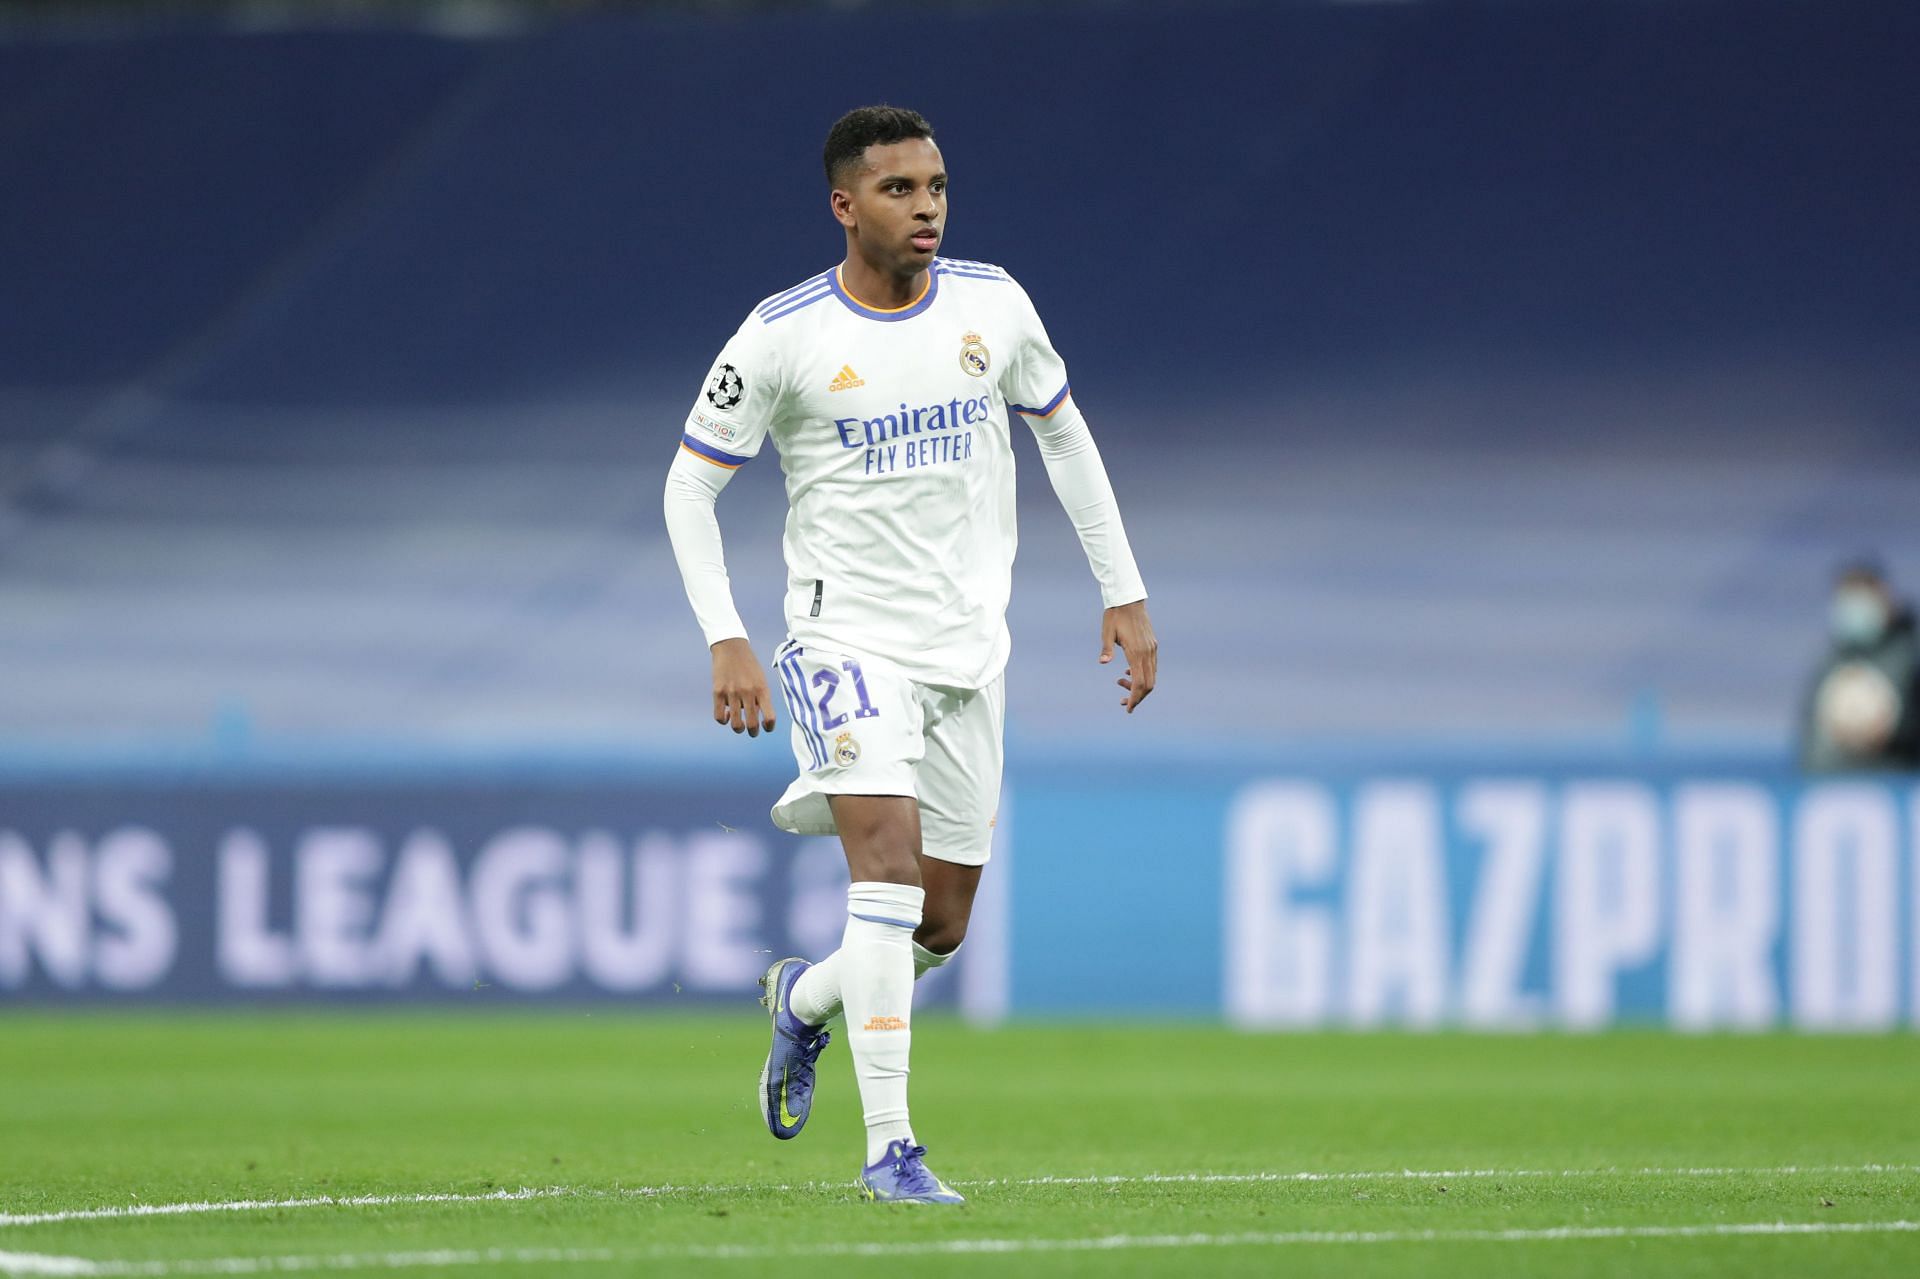 Rodrygo Goes is willing to end his association with Real Madrid and join Liverpool.